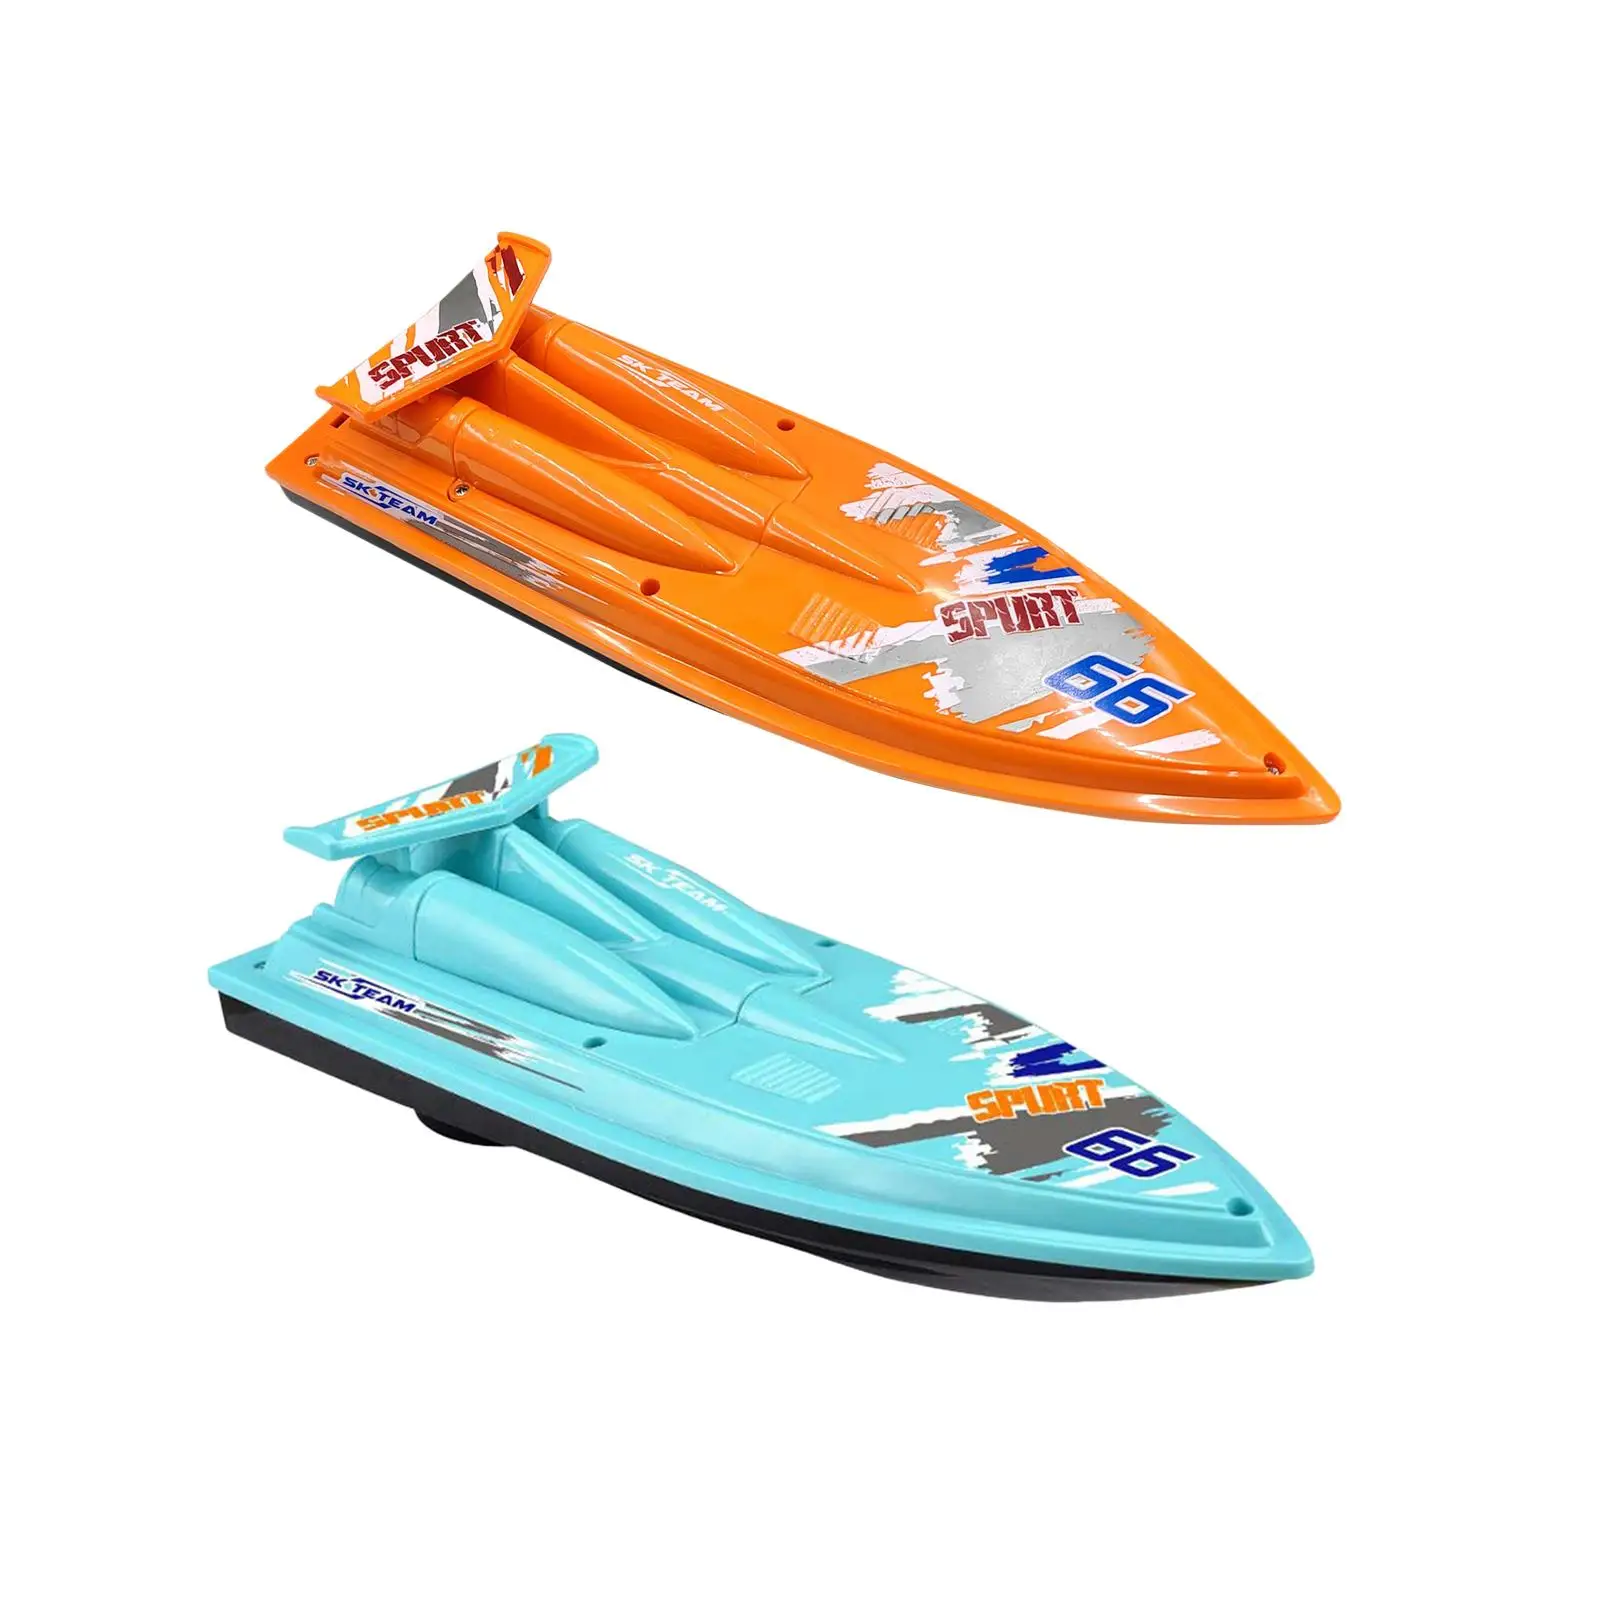 Bath Boat Toy Water Toy Water Playing Fun Bathtub Bath Toy Floating Boat Bath Toy Speed Boat for Kids Birthday Gift Party Favors